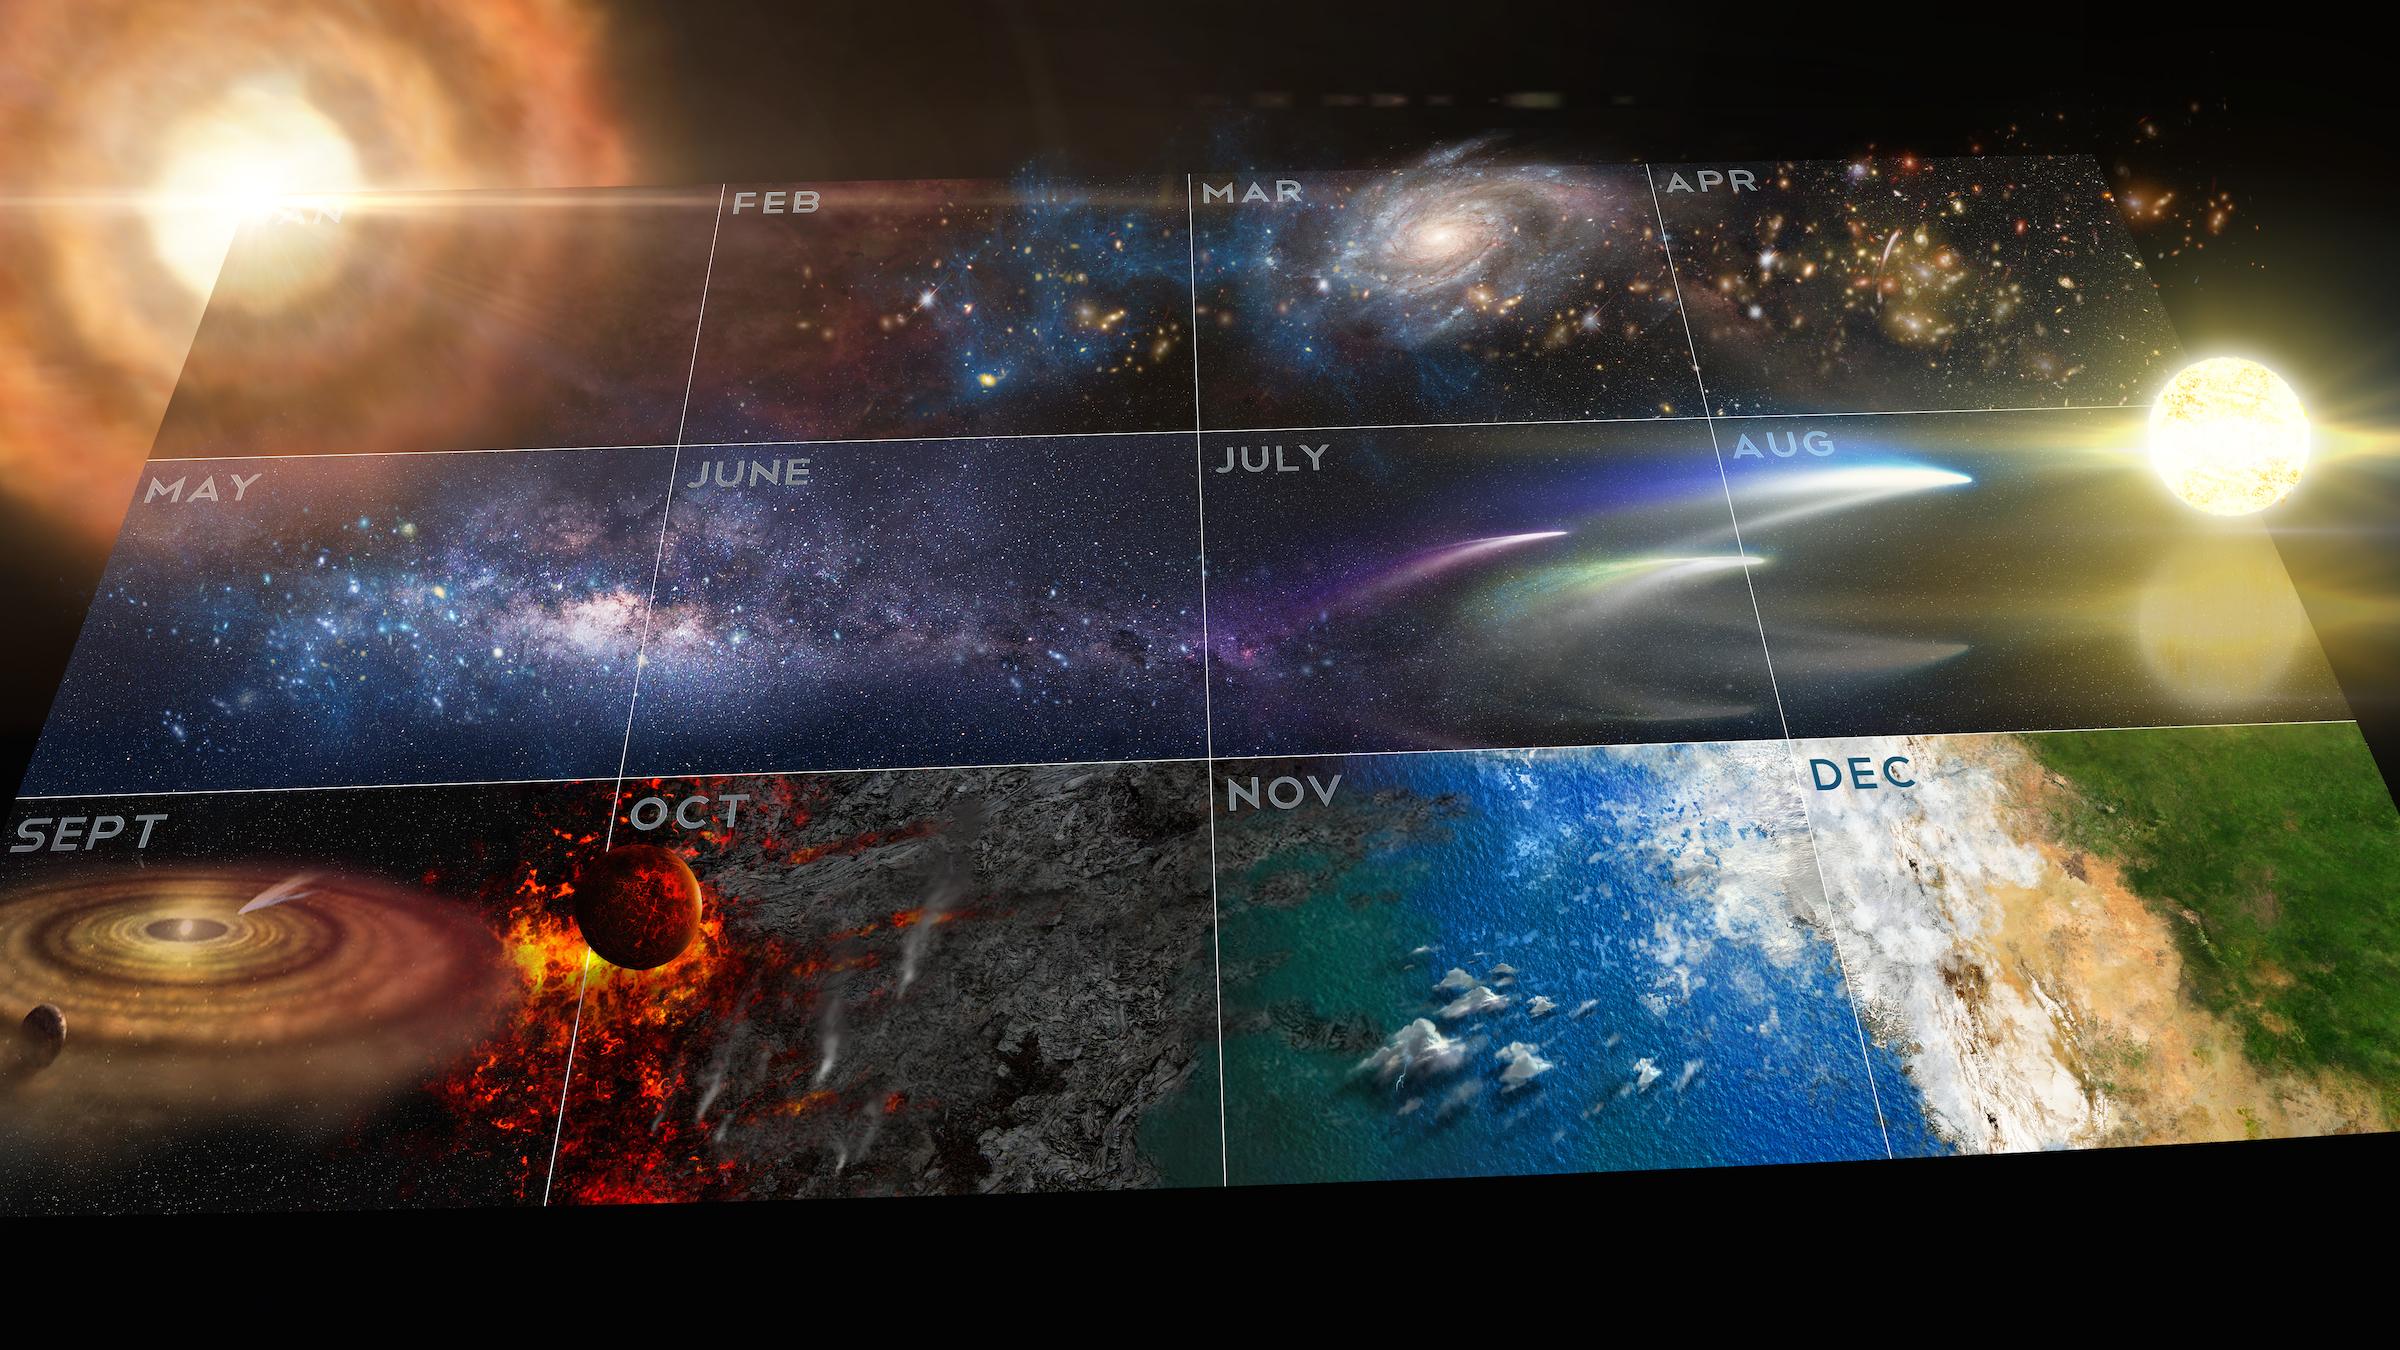 documentary history storytelling journey mind universe cartography [source: Cosmos (TV Series 2014)]